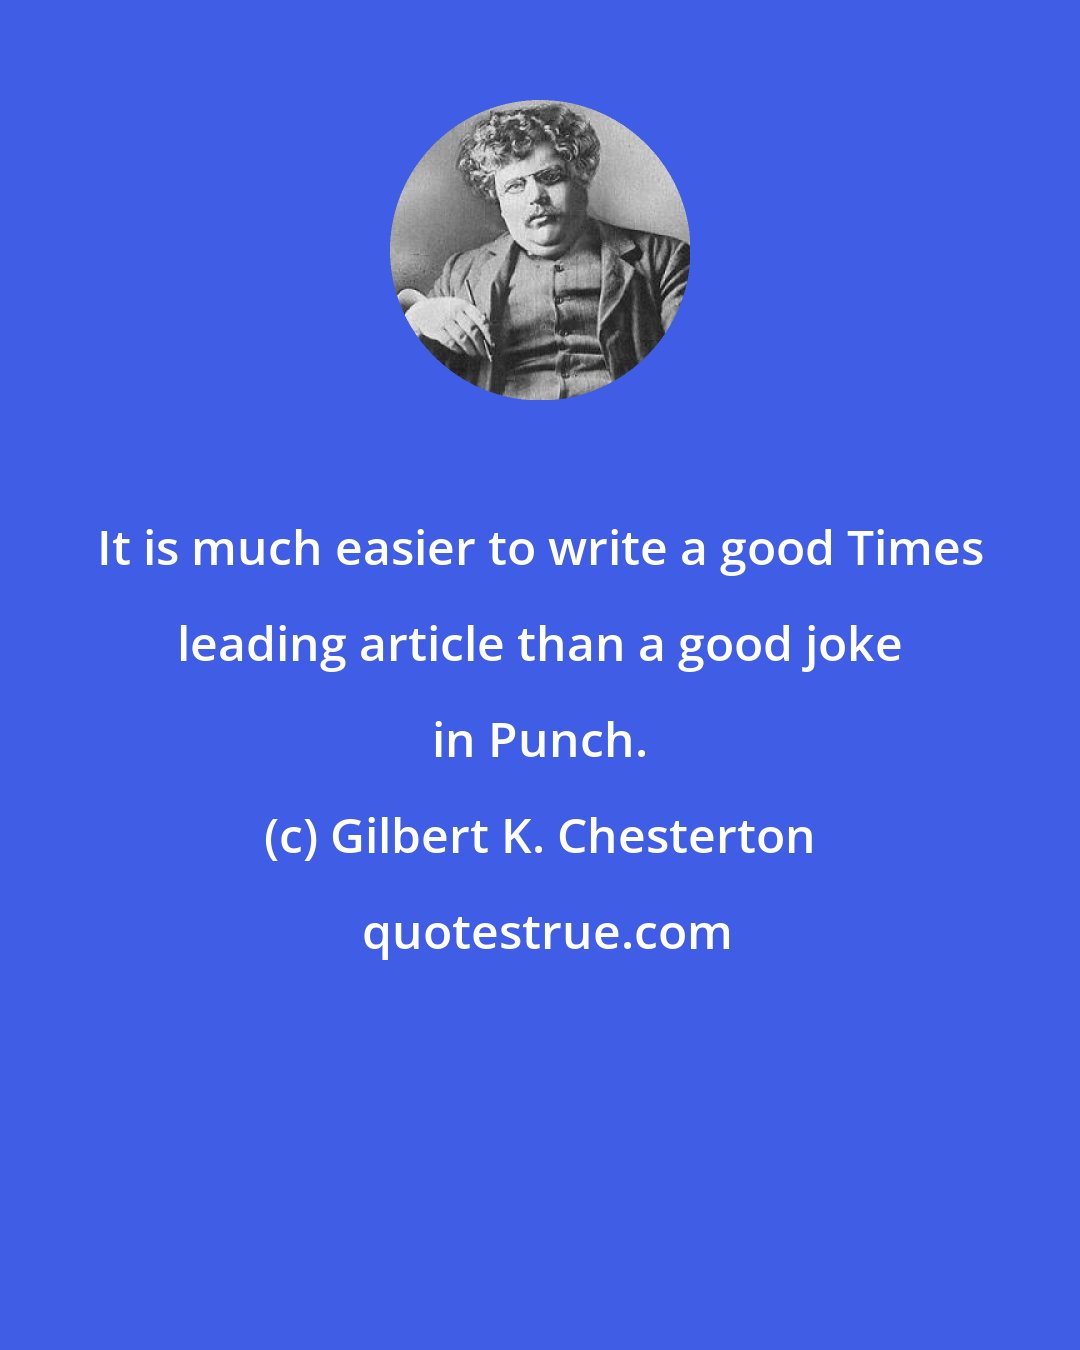 Gilbert K. Chesterton: It is much easier to write a good Times leading article than a good joke in Punch.